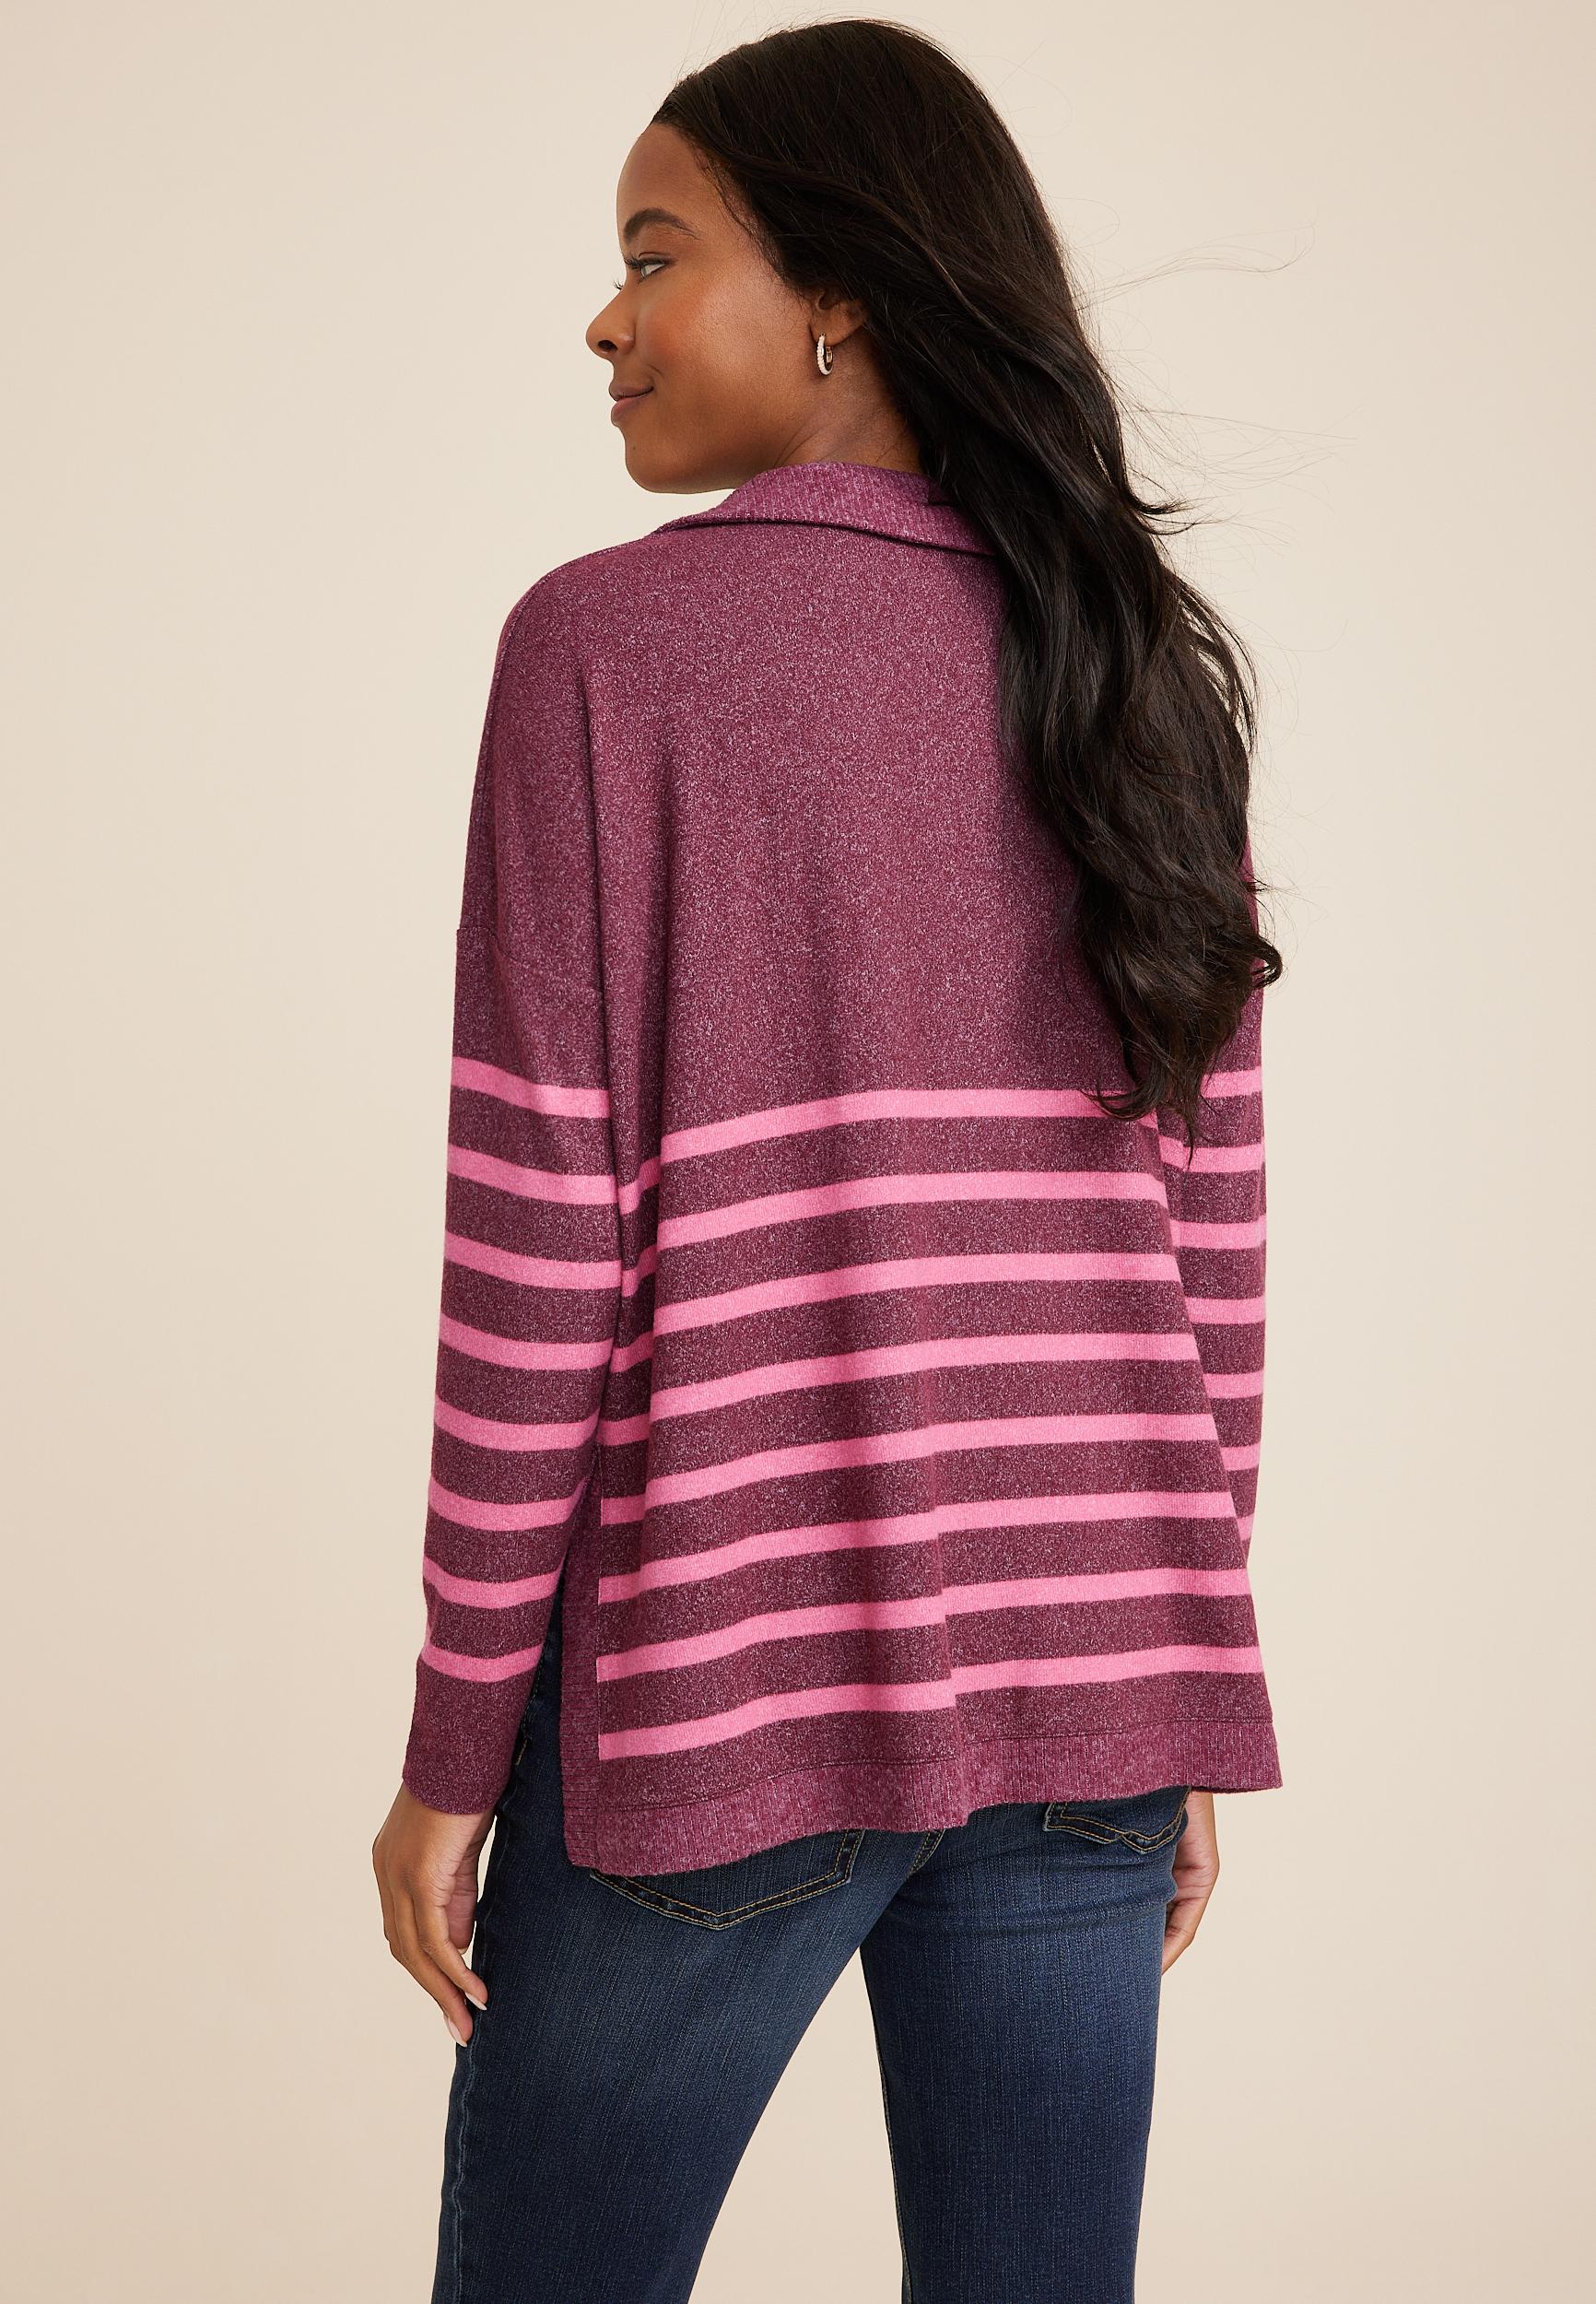 Collared maurices Fairview Striped | Top